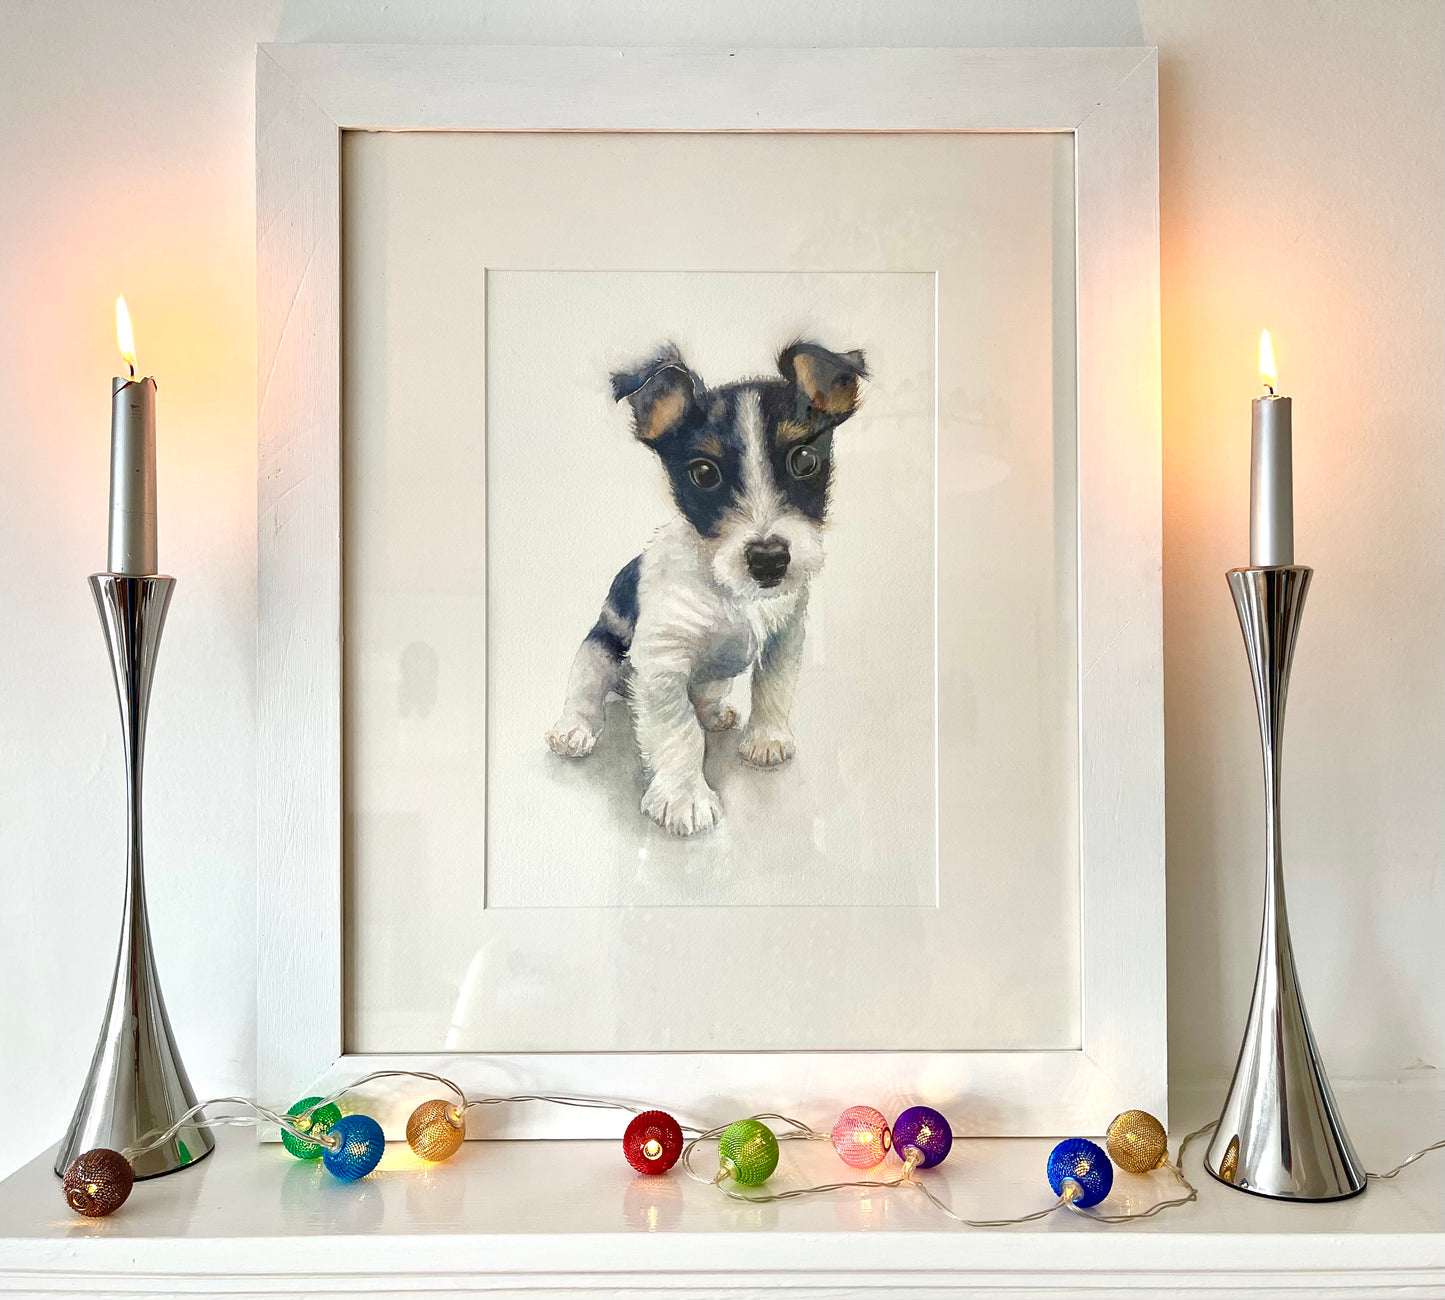 Abandoned Puppy, Fine Art Giclee Limited Edition Print